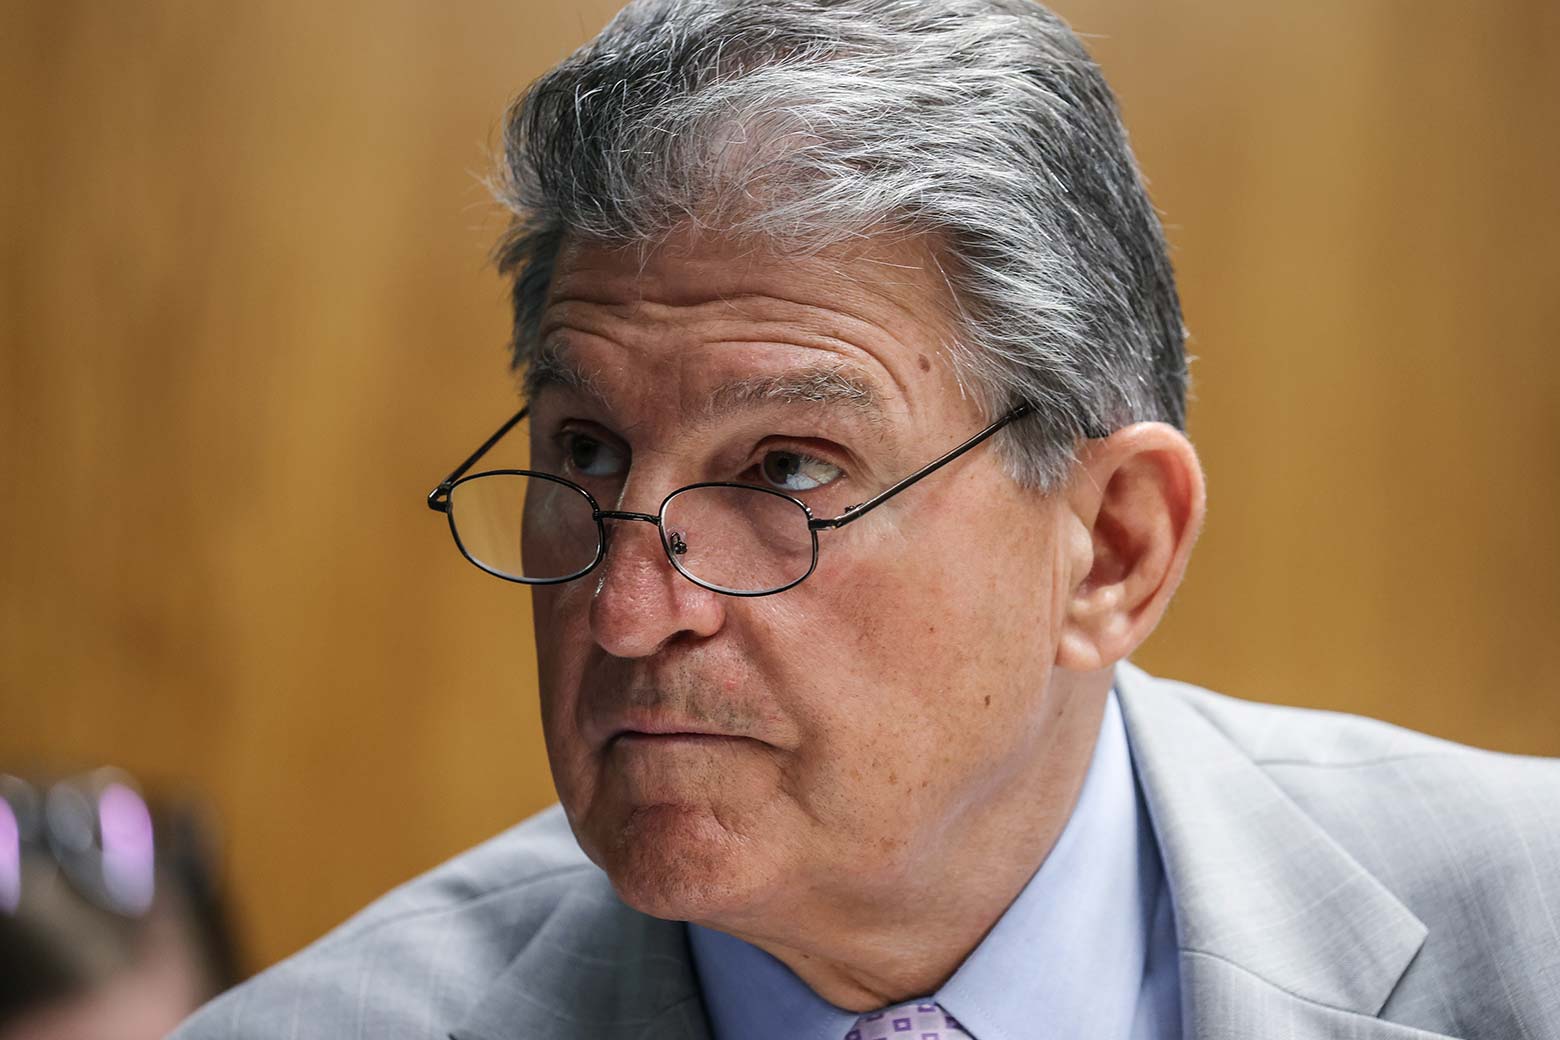 Joe Manchin looks upward over his glasses while at a hearing on Capitol Hill.